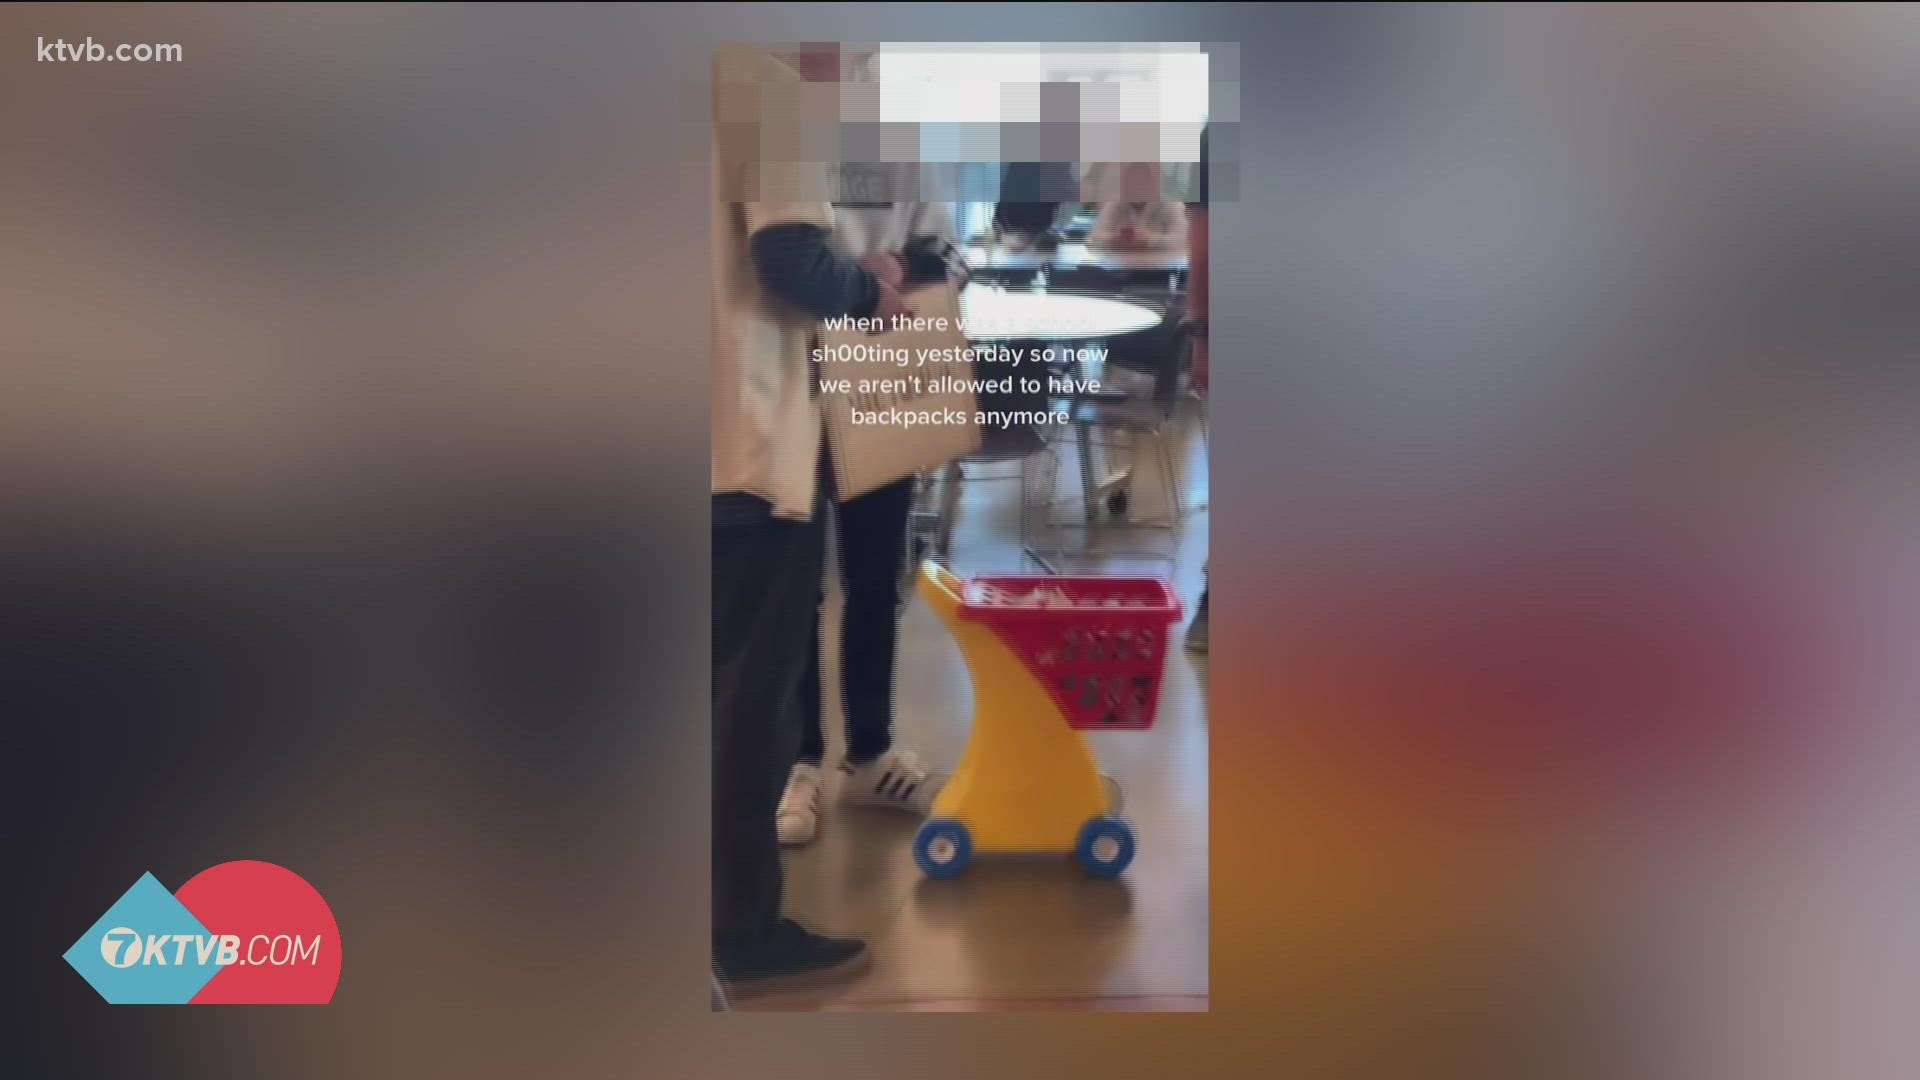 The ban on backpacks was documented on TikTok, where videos of students using everything from shopping carts to children's wagons to carry their stuff went viral.